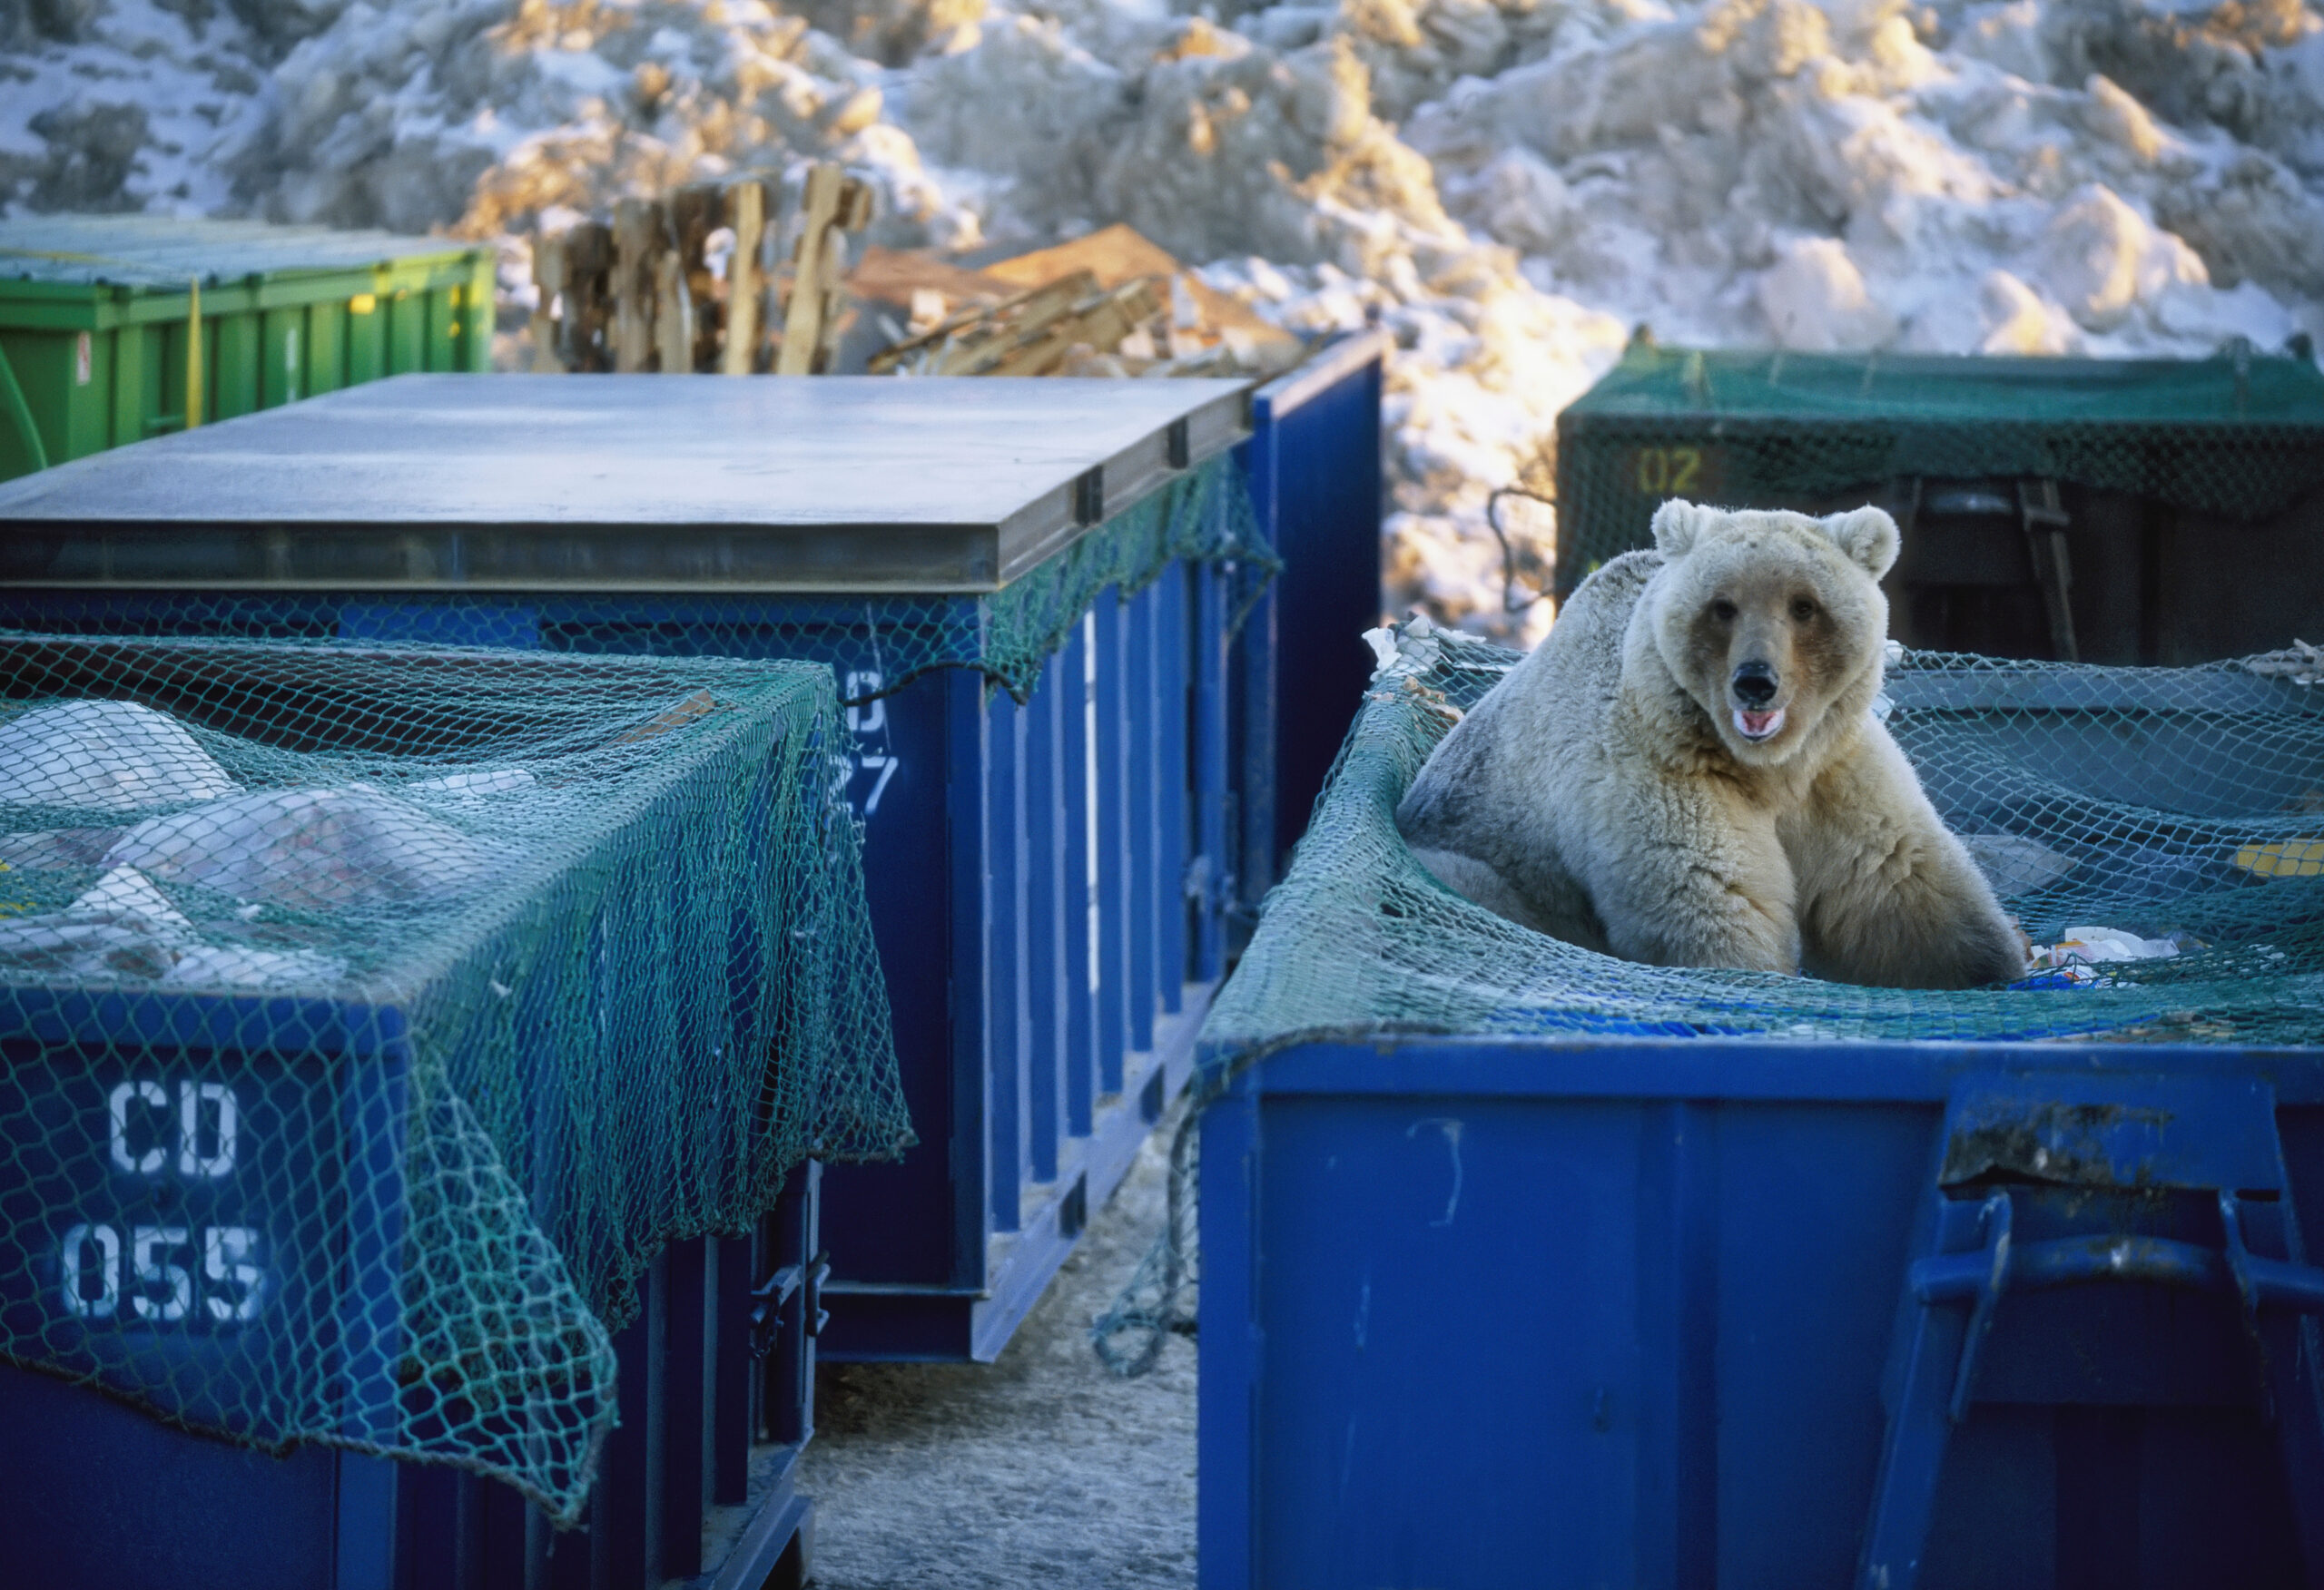 blond grizzly bear in dumpster